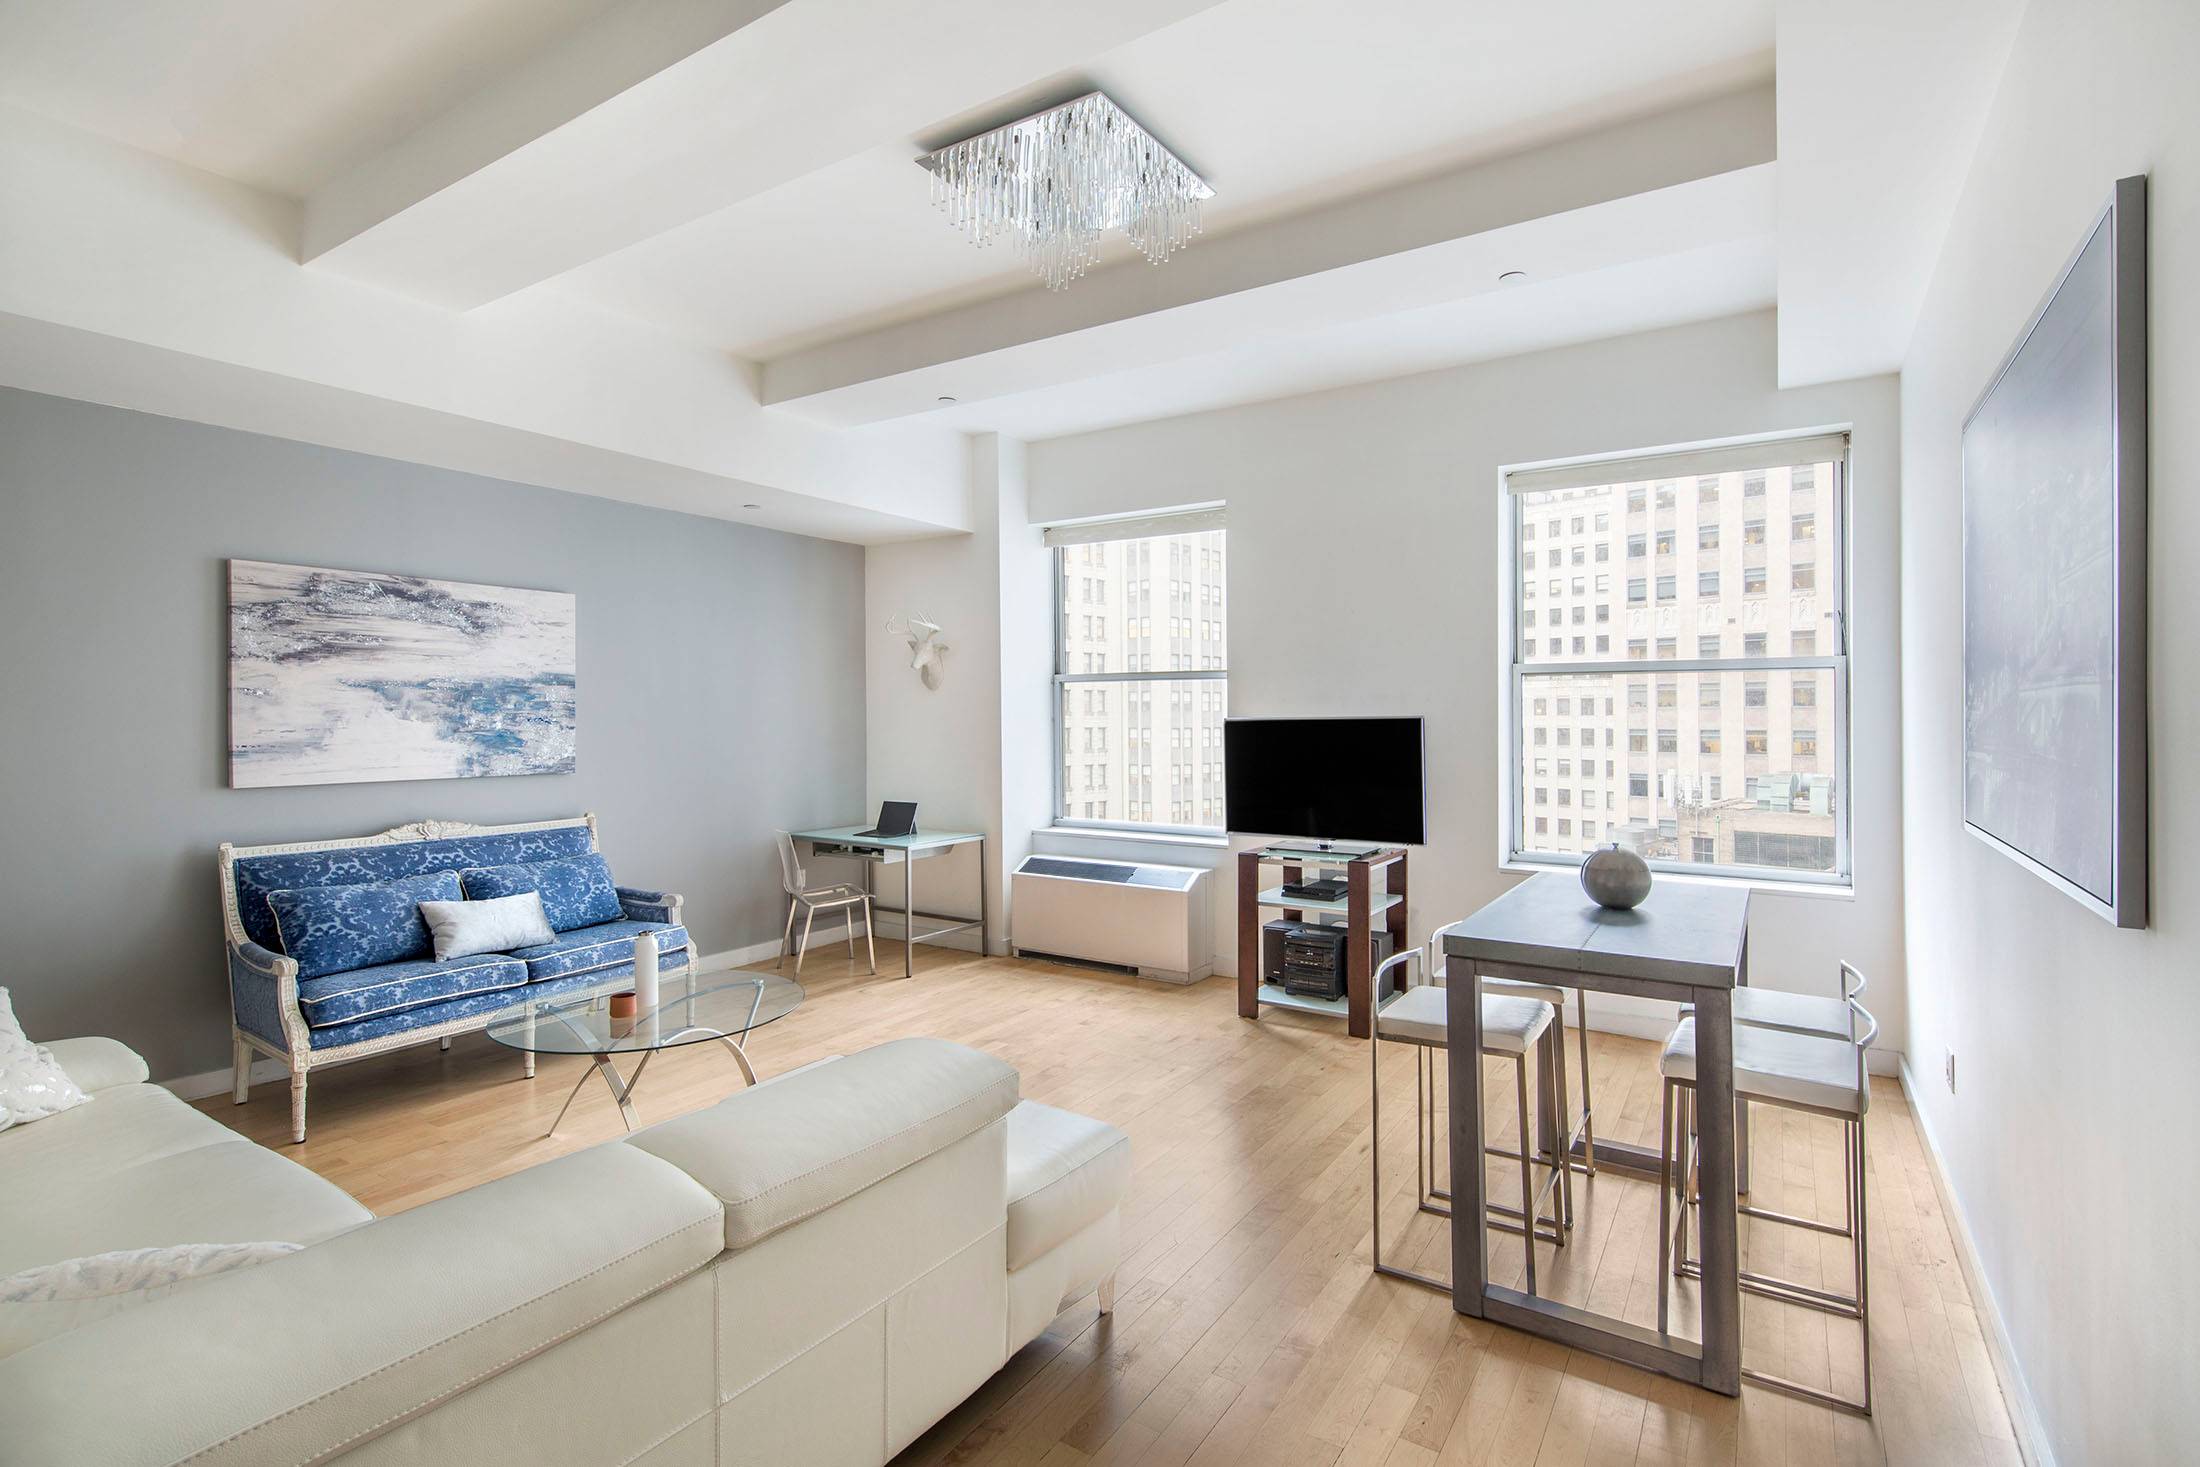 THE LOFT Loft 1802, with its wide open spaces and one of a kind layout, puts traditional cookie cutter apartments to shame.